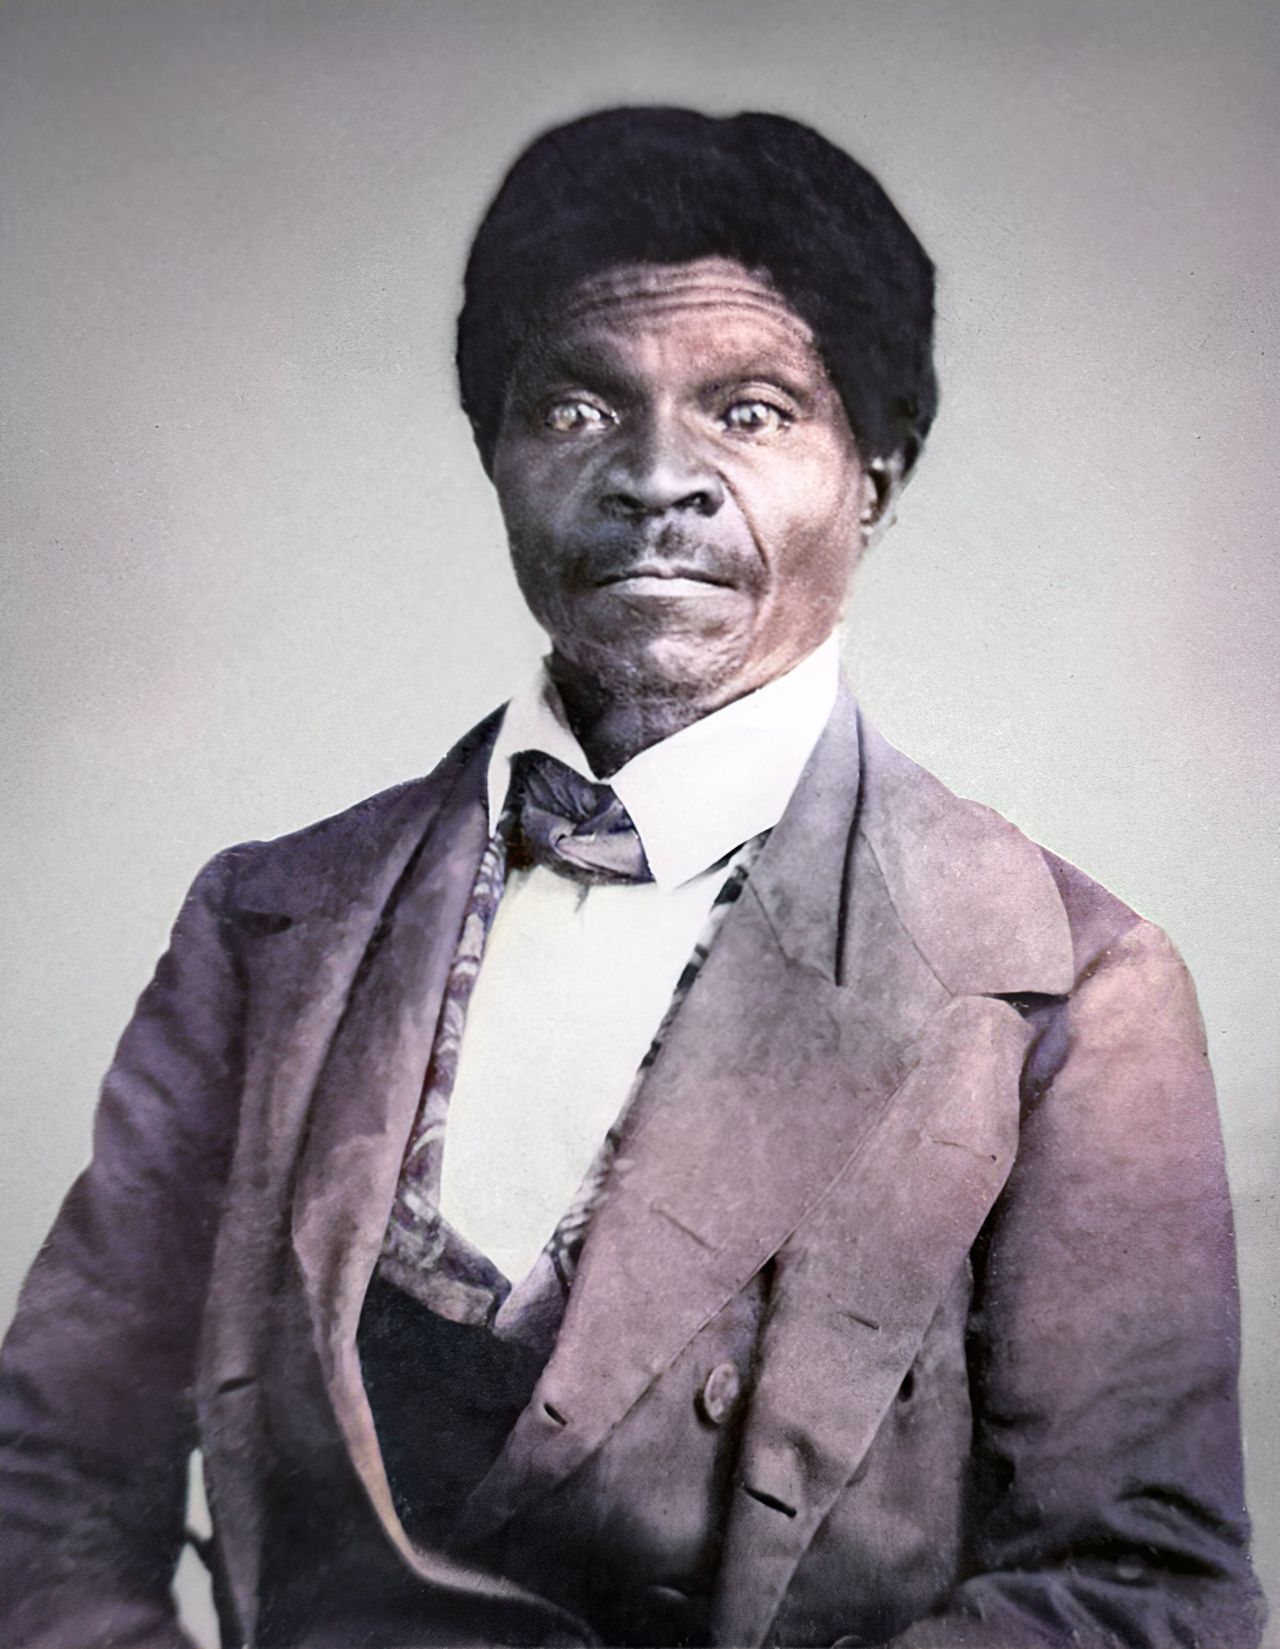 The Supreme Court, in the 1857 case of Dred Scott (pictured), ruled that Black people were "so far inferior, that they had no rights which the white man was bound to respect."